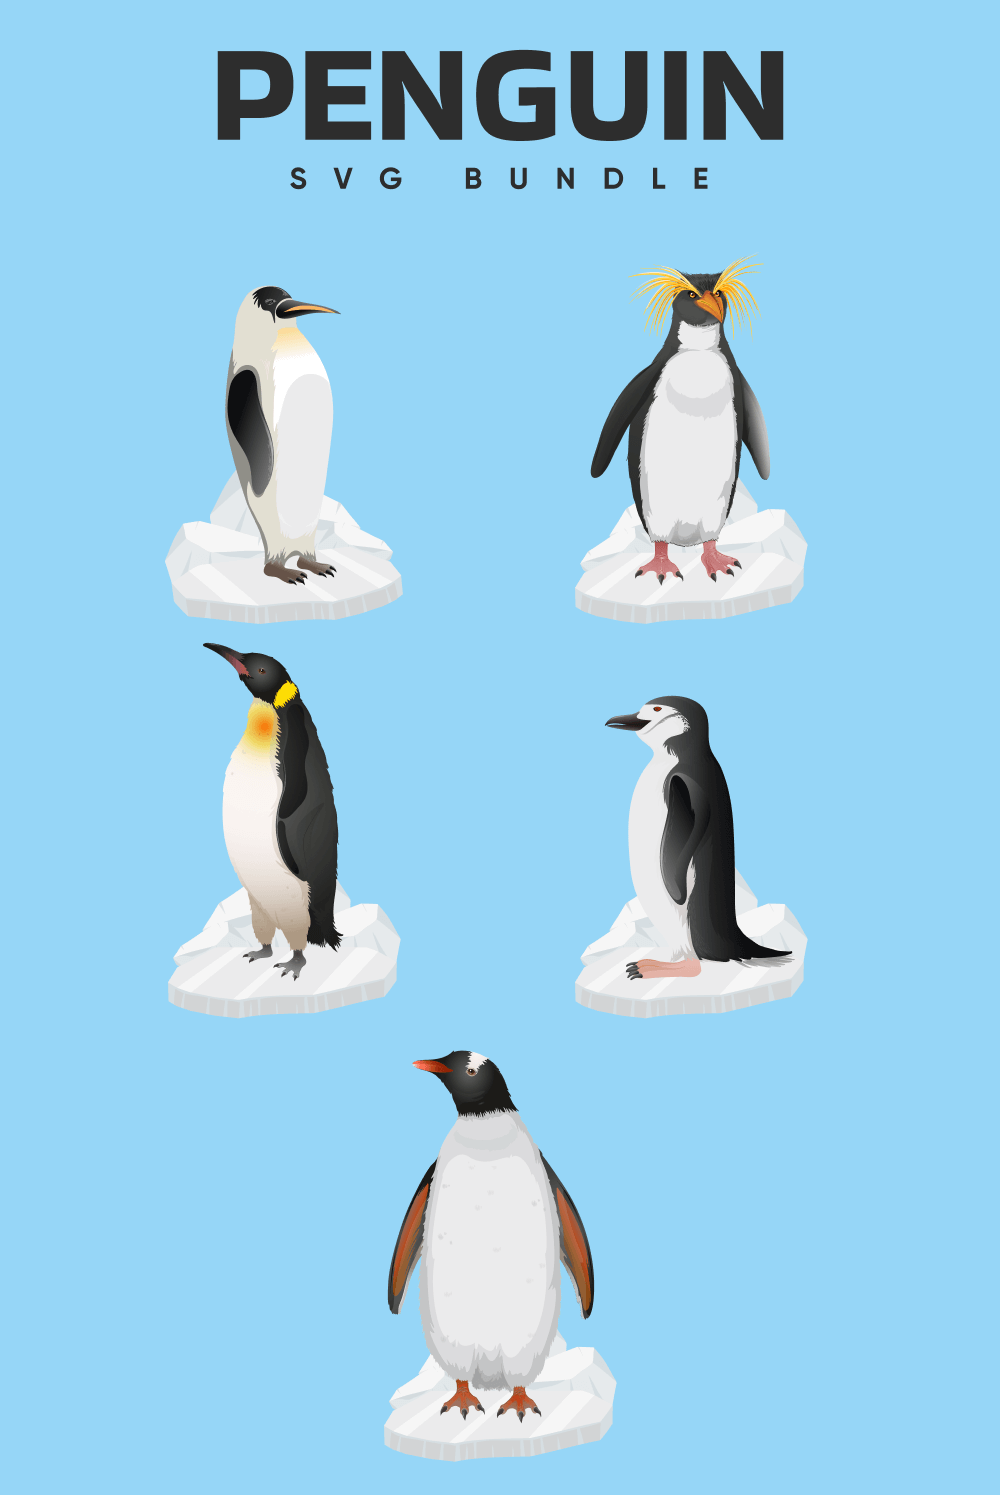 King and other penguins on a blue background.